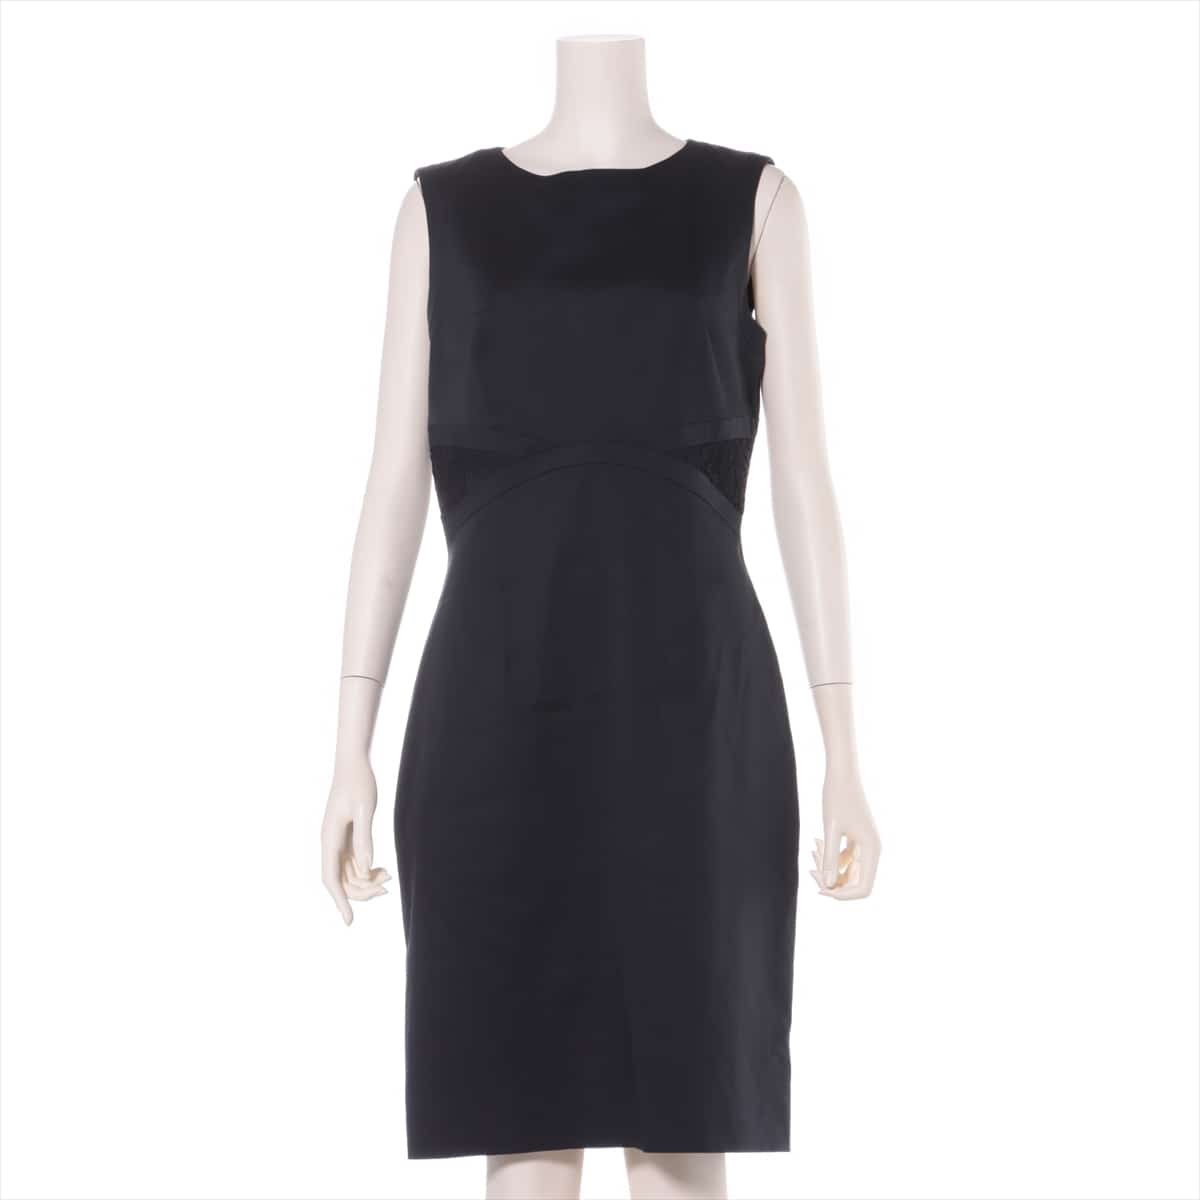 Christian Dior Cotton Sleeveless dress 40 Ladies' Navy blue  Switch between lace embroidery